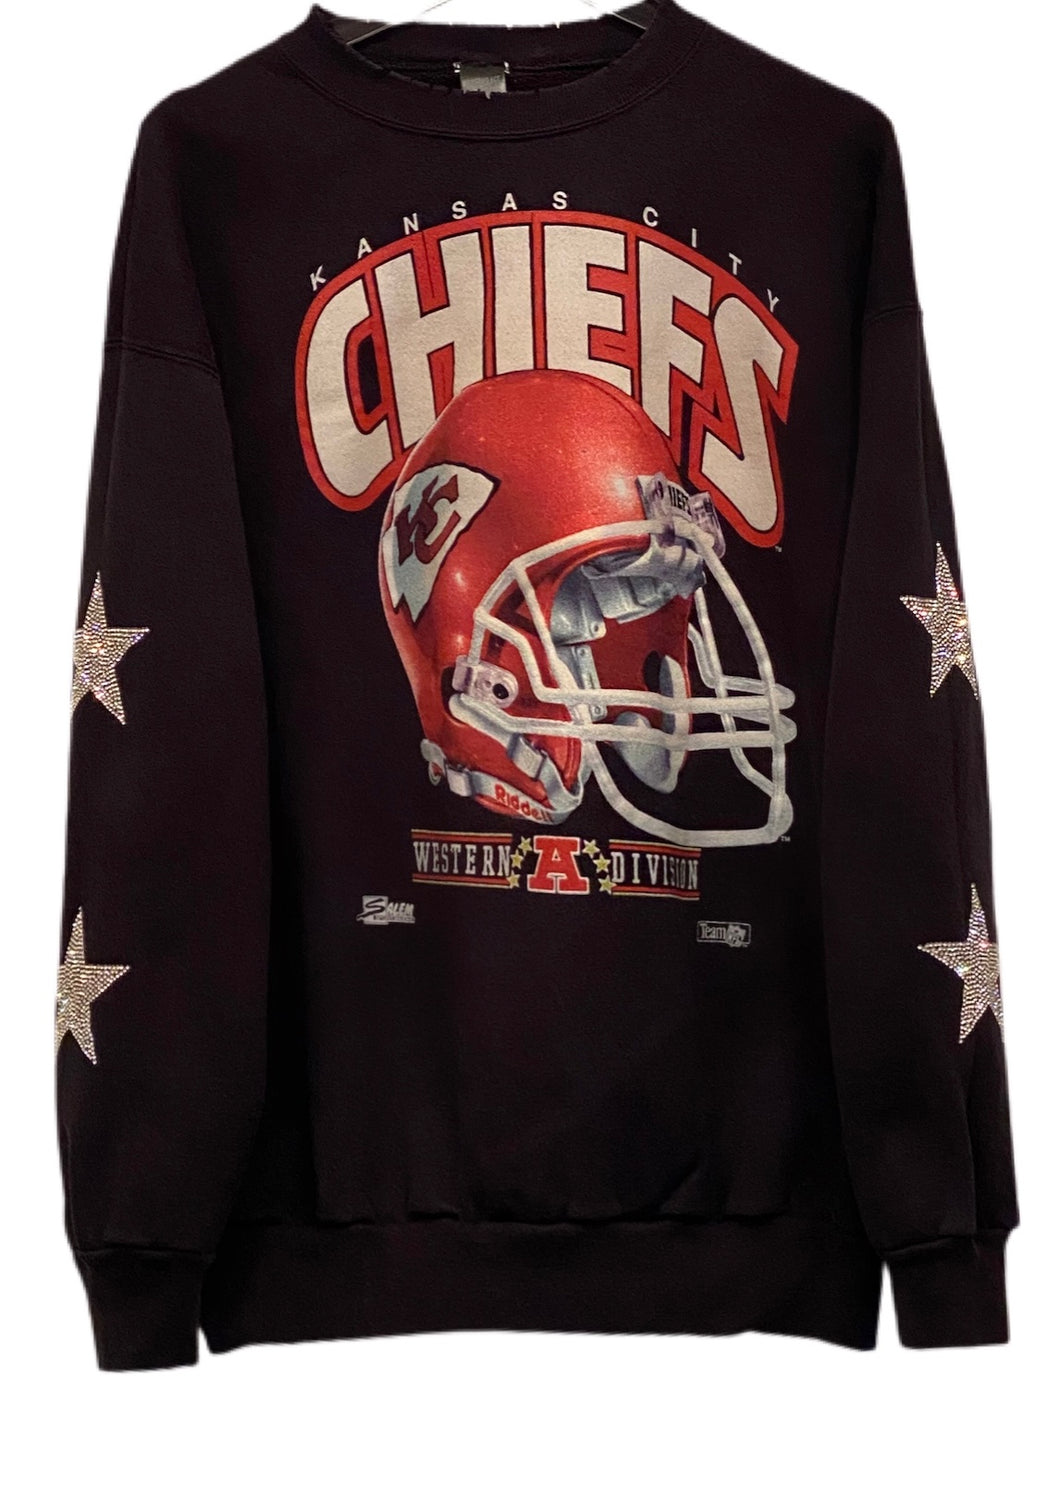 Kansas City Chiefs, NFL One of a KIND Vintage Sweatshirt with Crystal Star Design